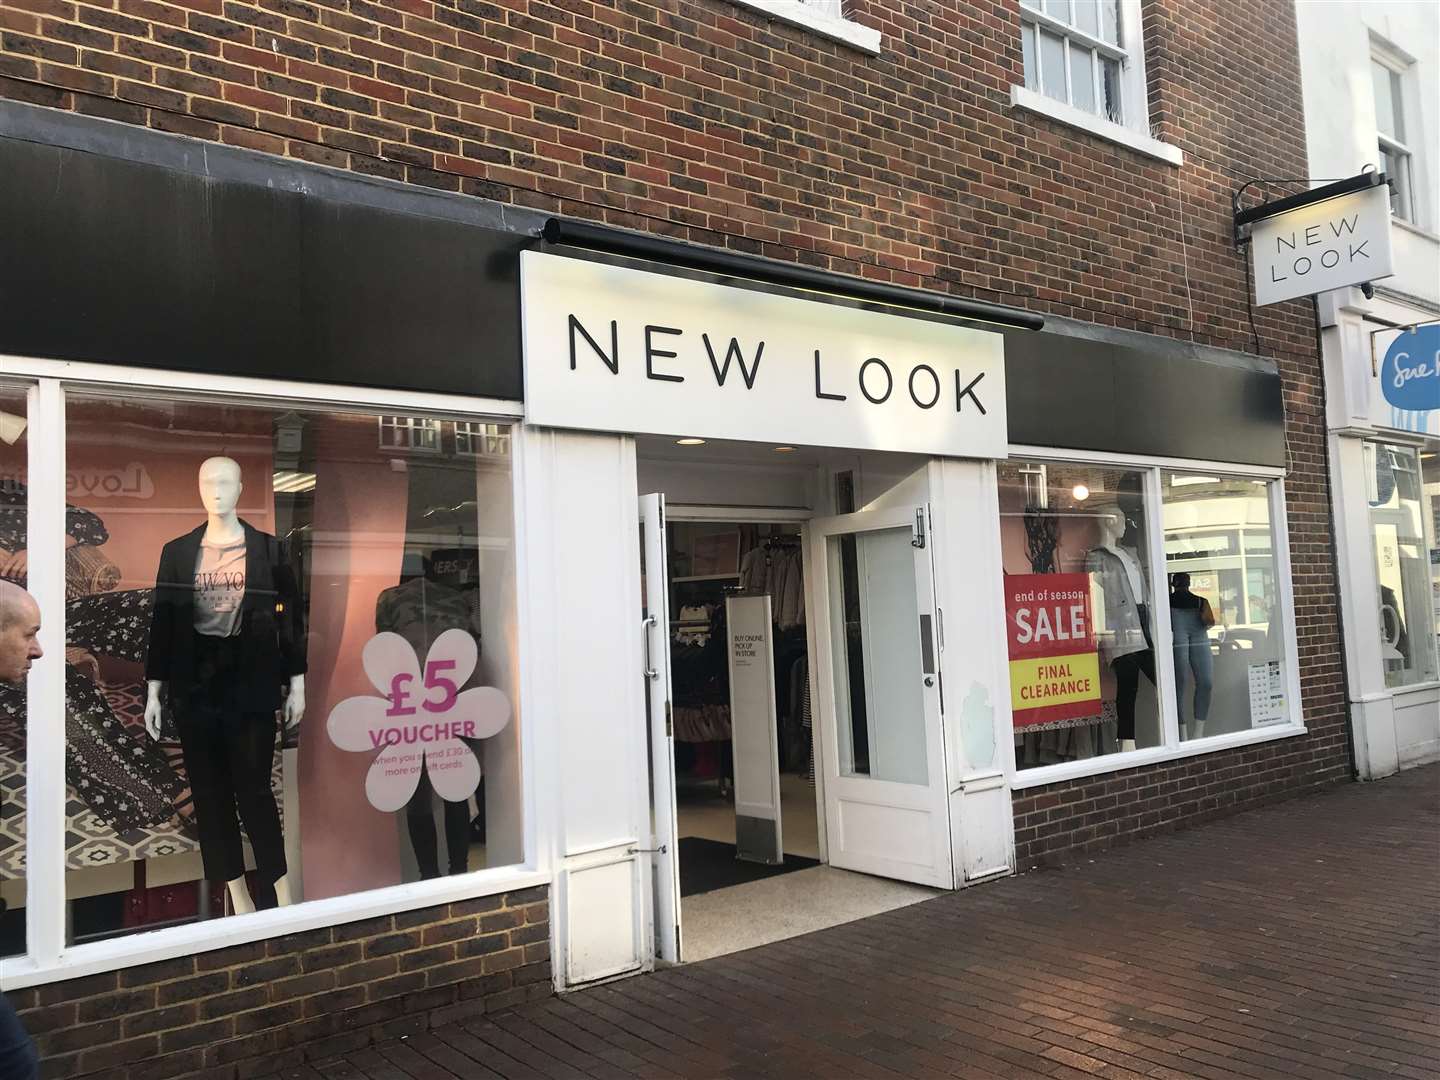 New Look has been a go-to store for women's fashion items in Deal for almost three decades